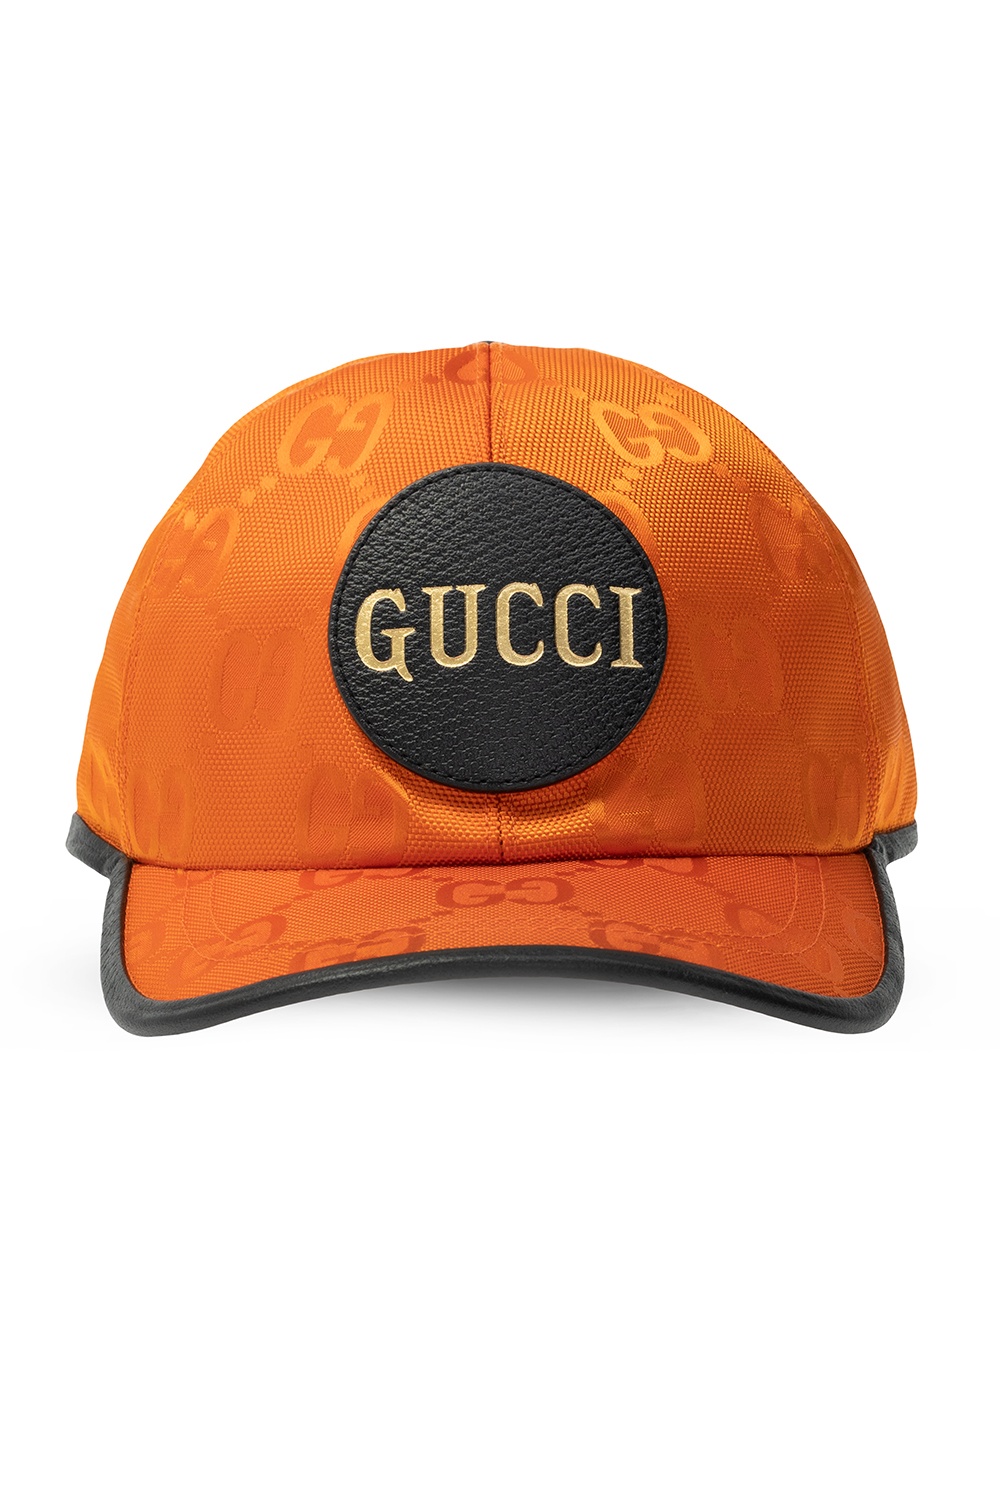 gucci comme